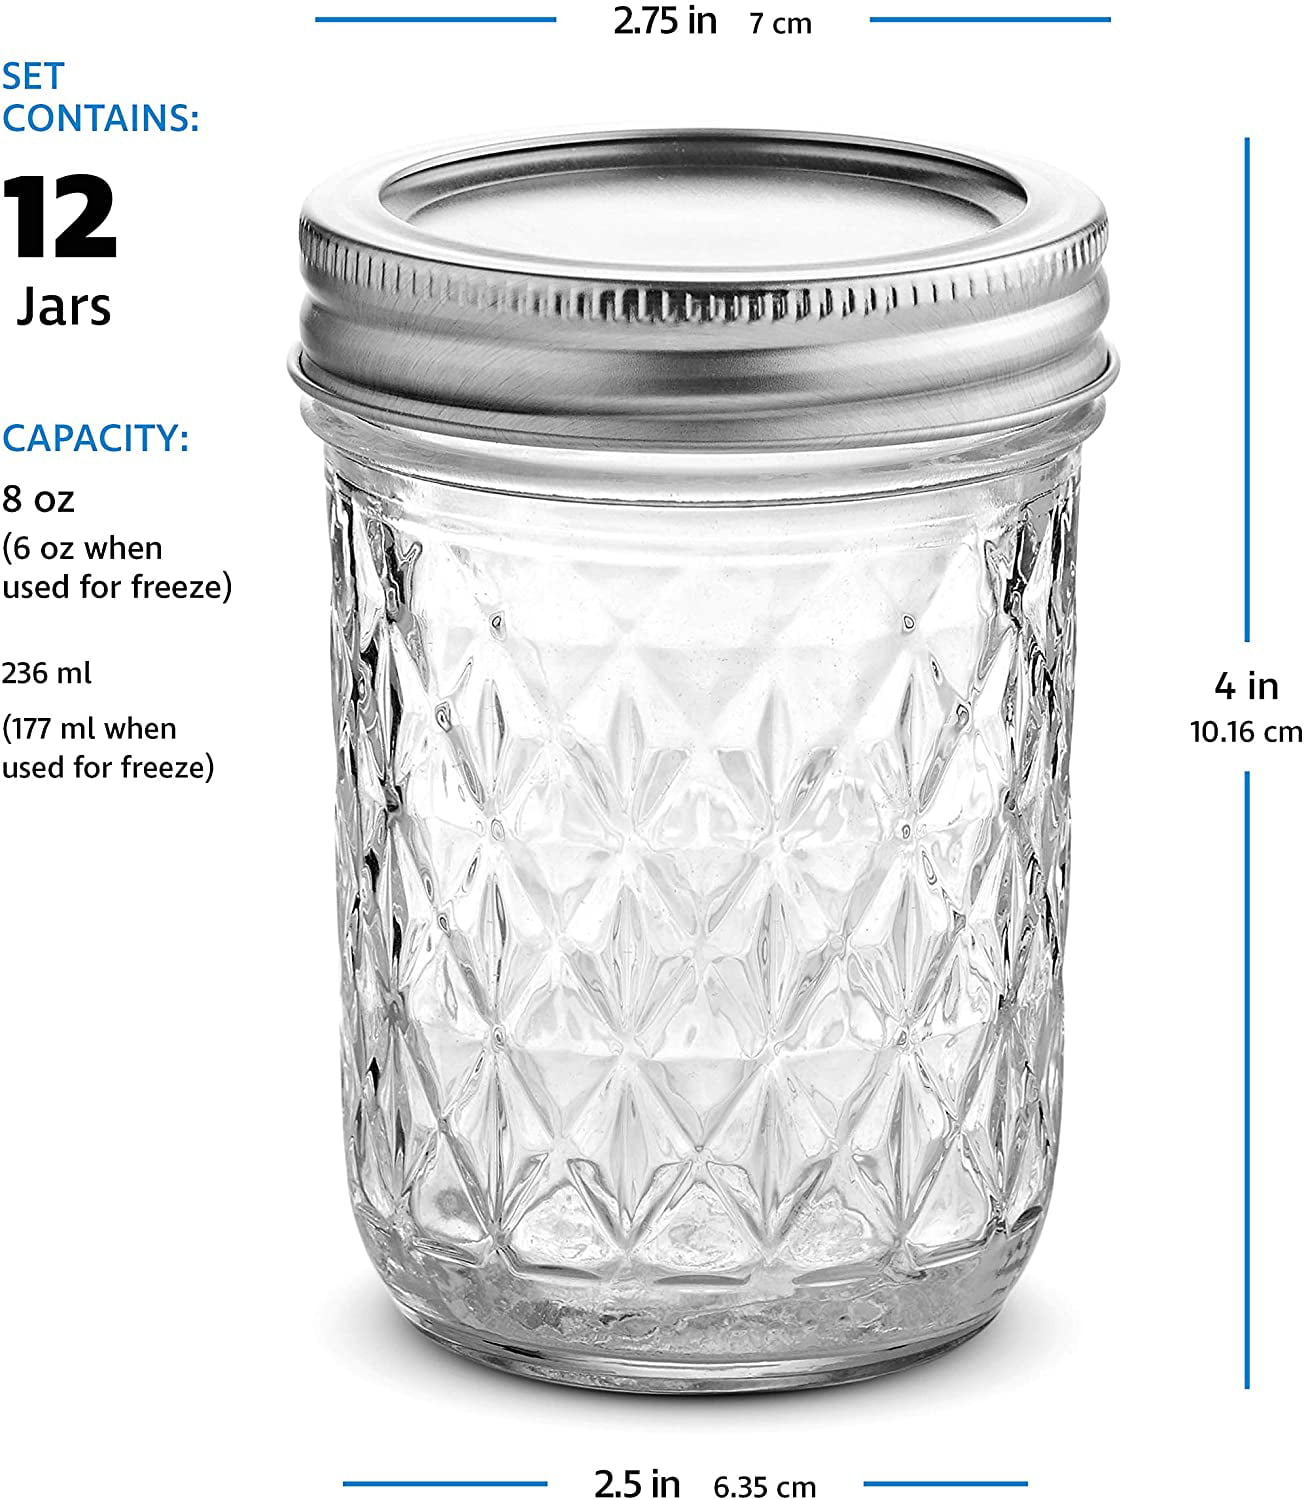 JoyJolt 8 Oz Mason Jars With Lids, Labels and Measures! 6-Pack Regular  Mouth Mason Jars, Glass Jar with Lid and Band. Airtight Canning Jars,  Overnight